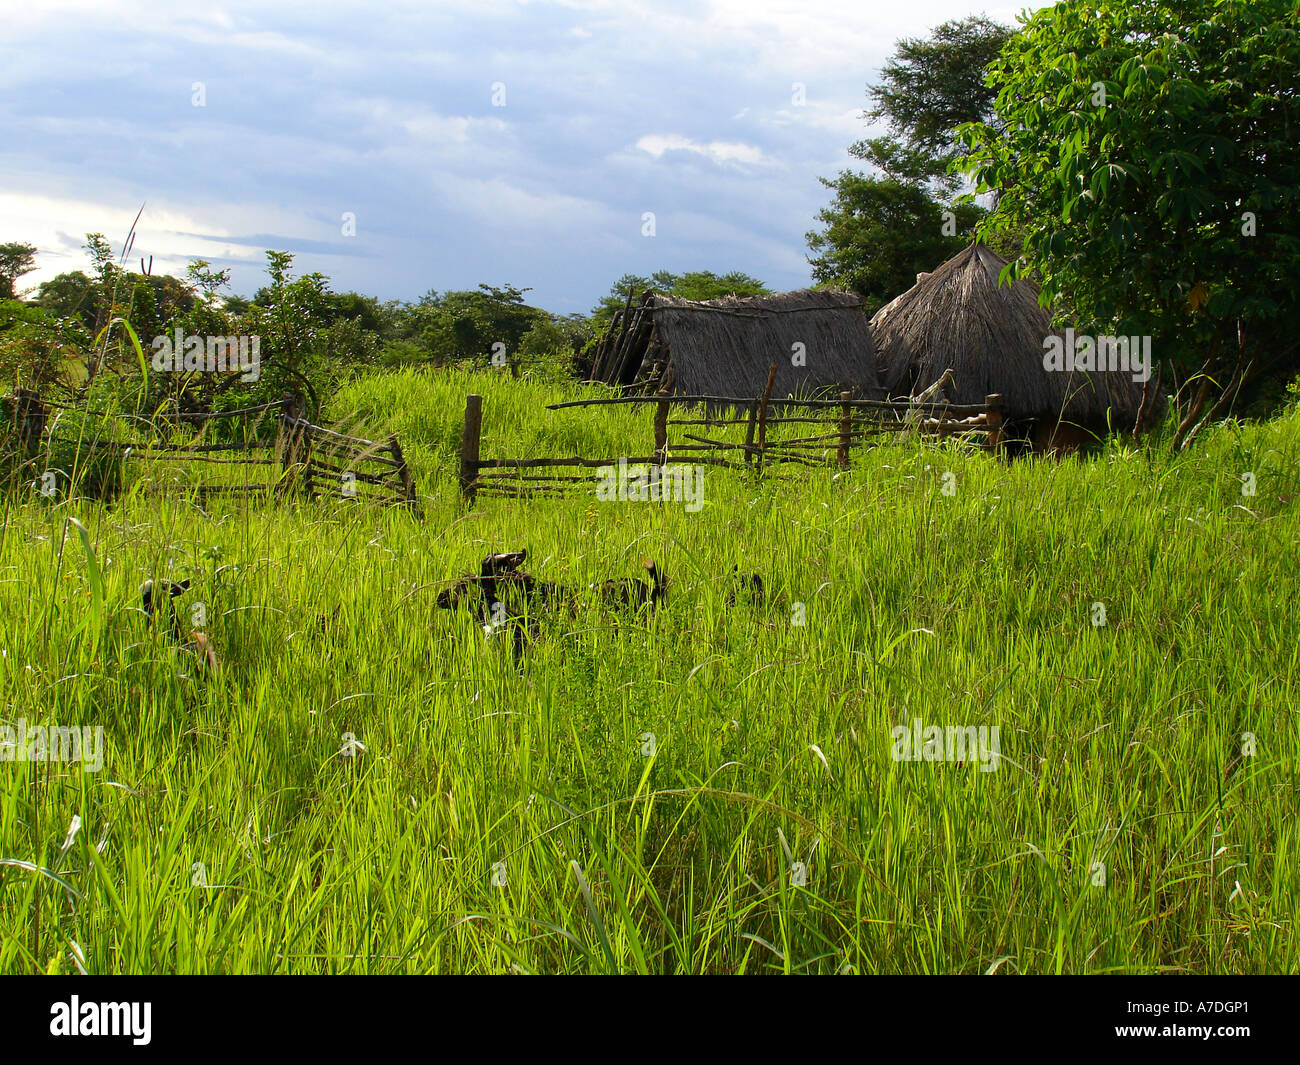 Green field with traditional thatched roof houses and domestic goats in a village in Copperbelt province of Zambia Stock Photo